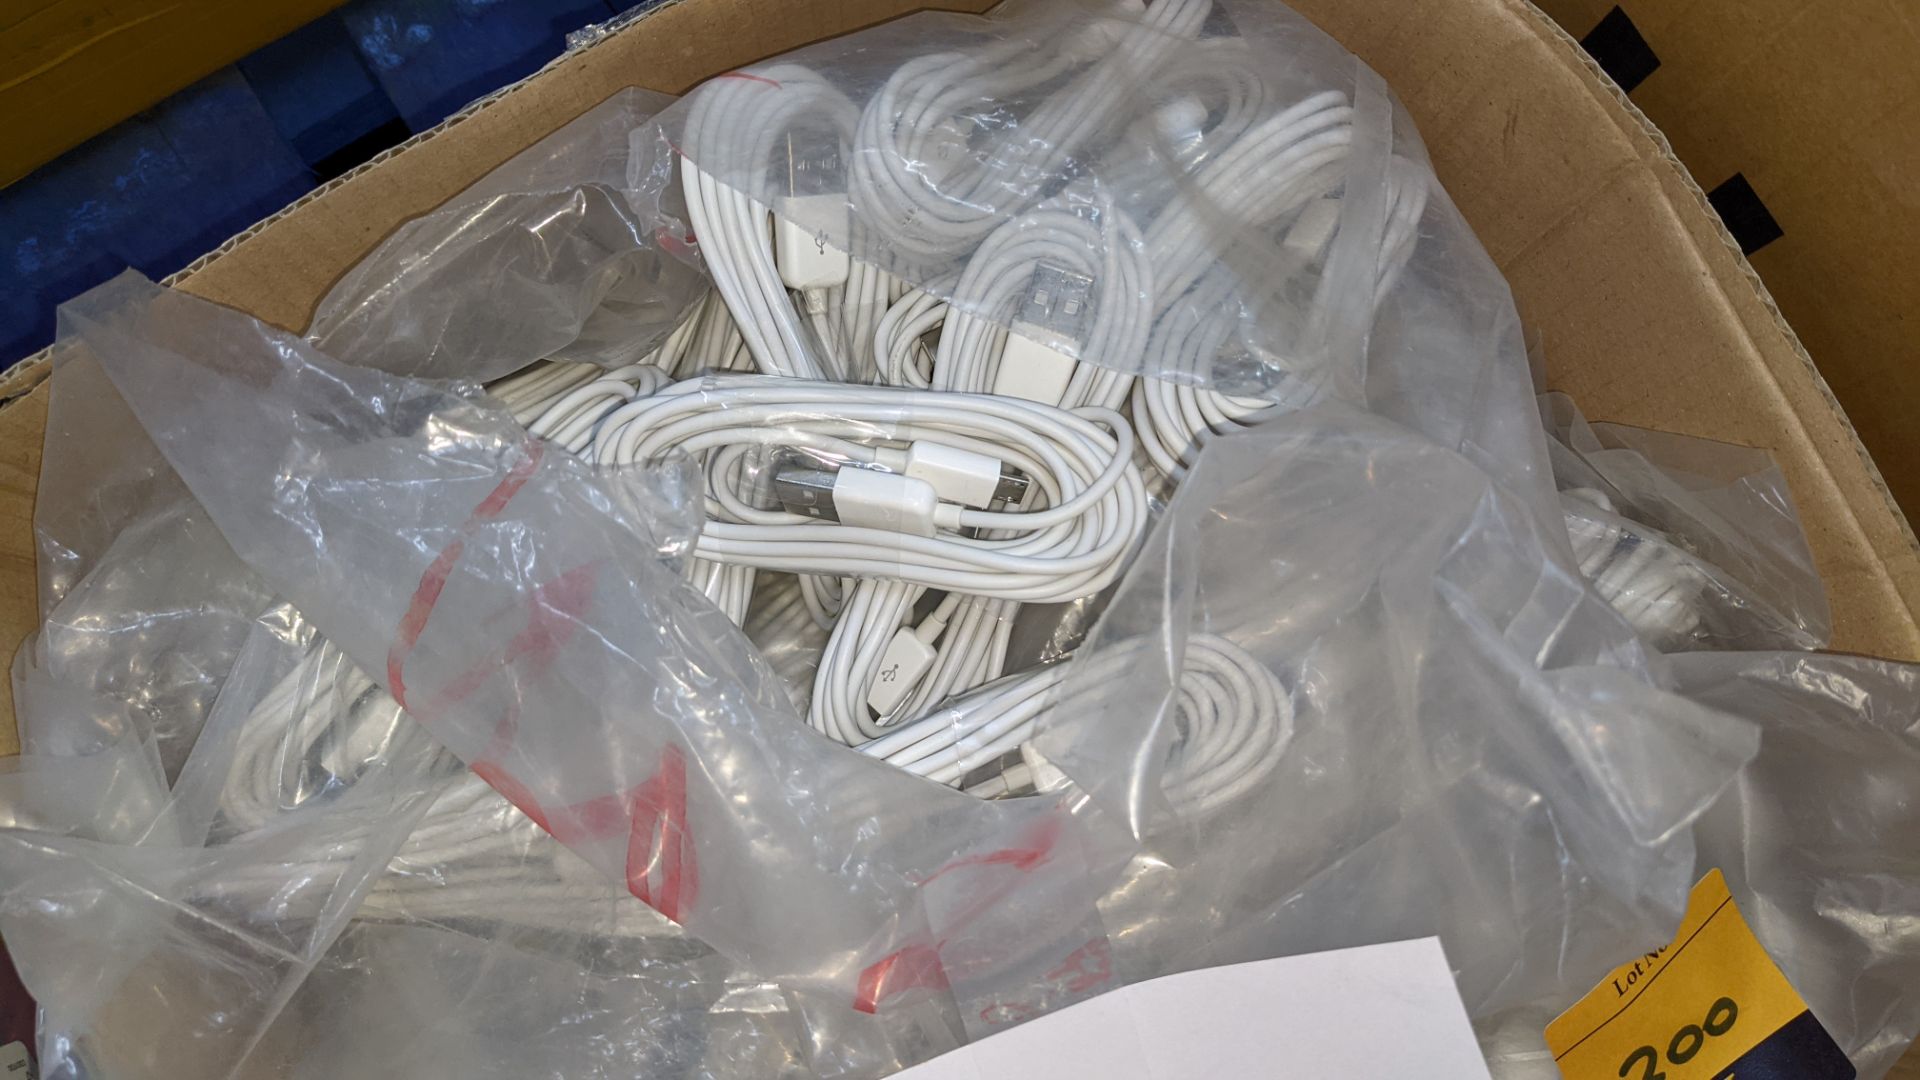 129 off USB to micro USB cables - Image 2 of 4